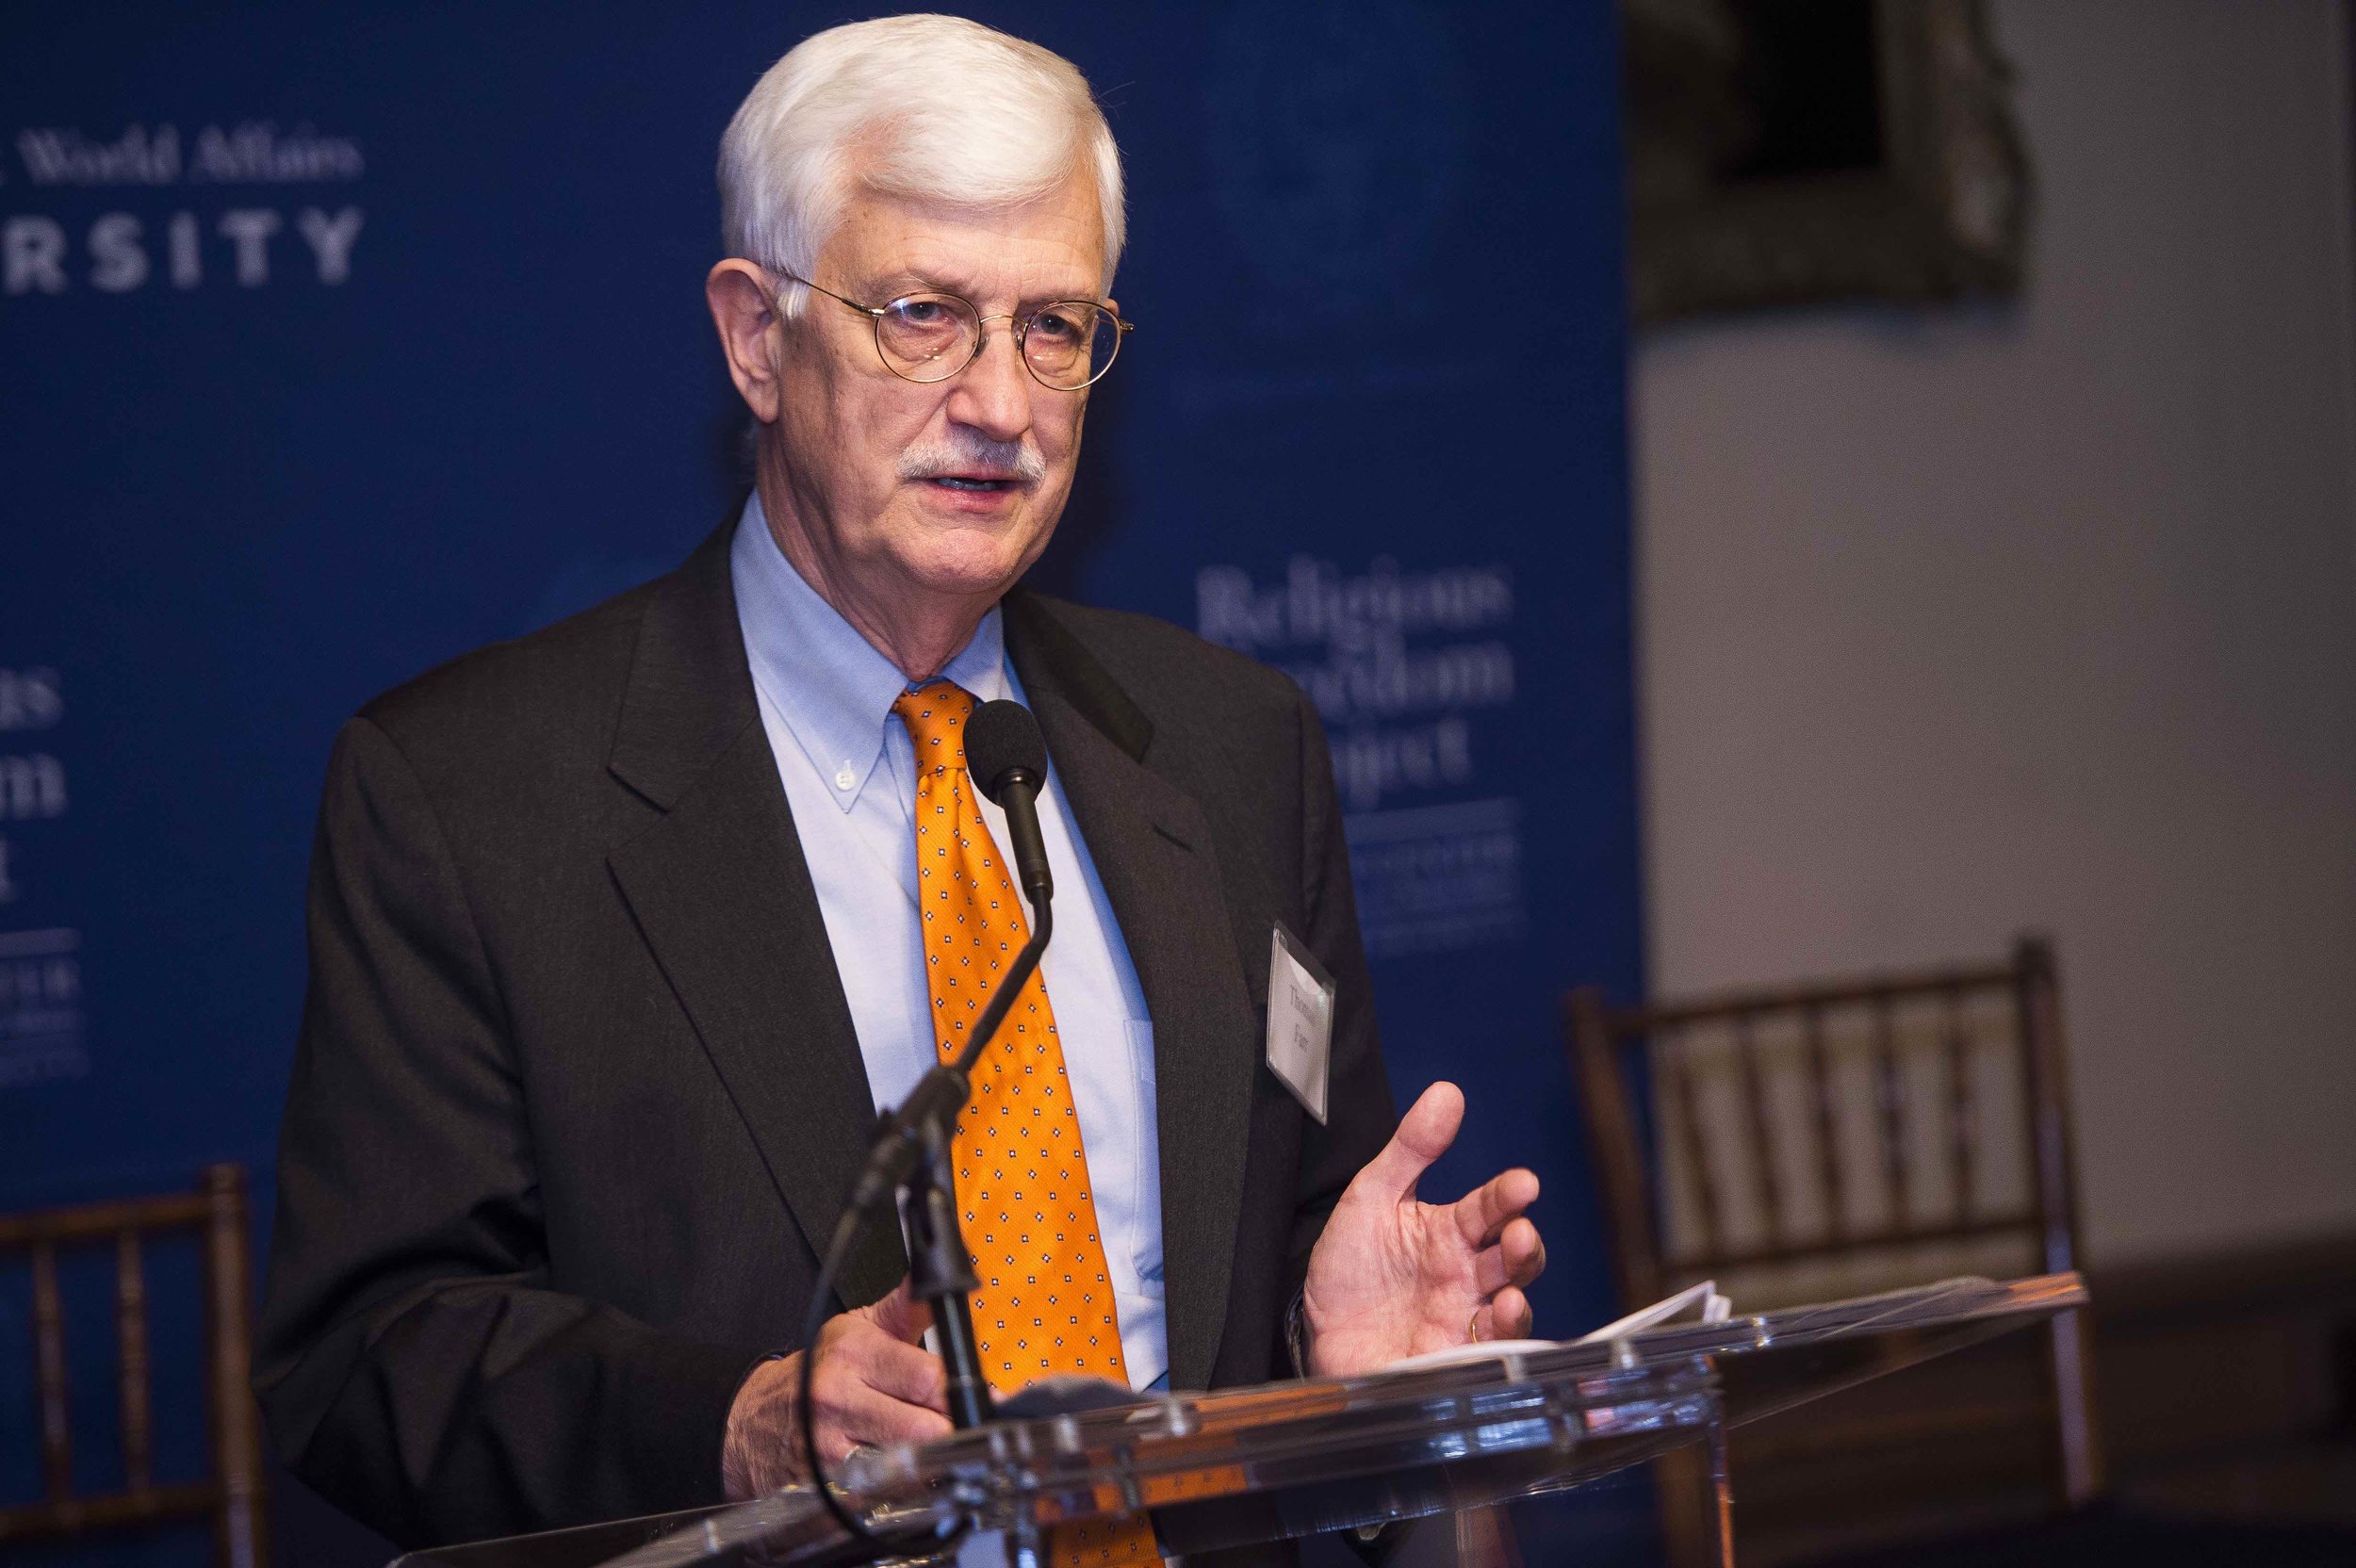  Thomas Farr, President, Religious Freedom Institute and Director, Religious Freedom Project 